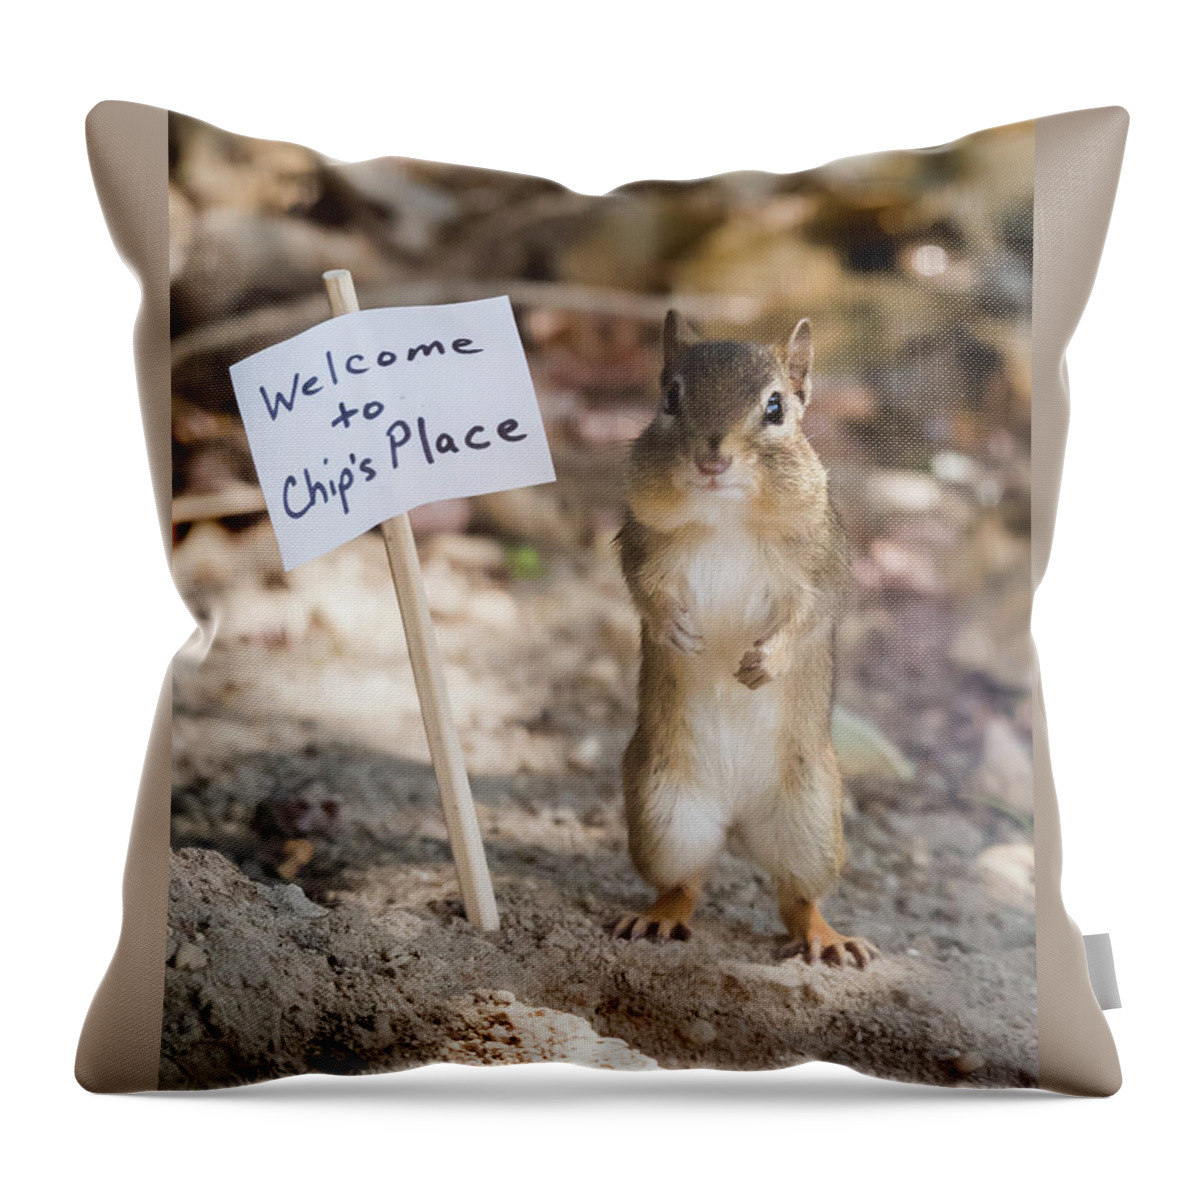 Terry D Photography Throw Pillow featuring the photograph Chip's Place by Terry DeLuco